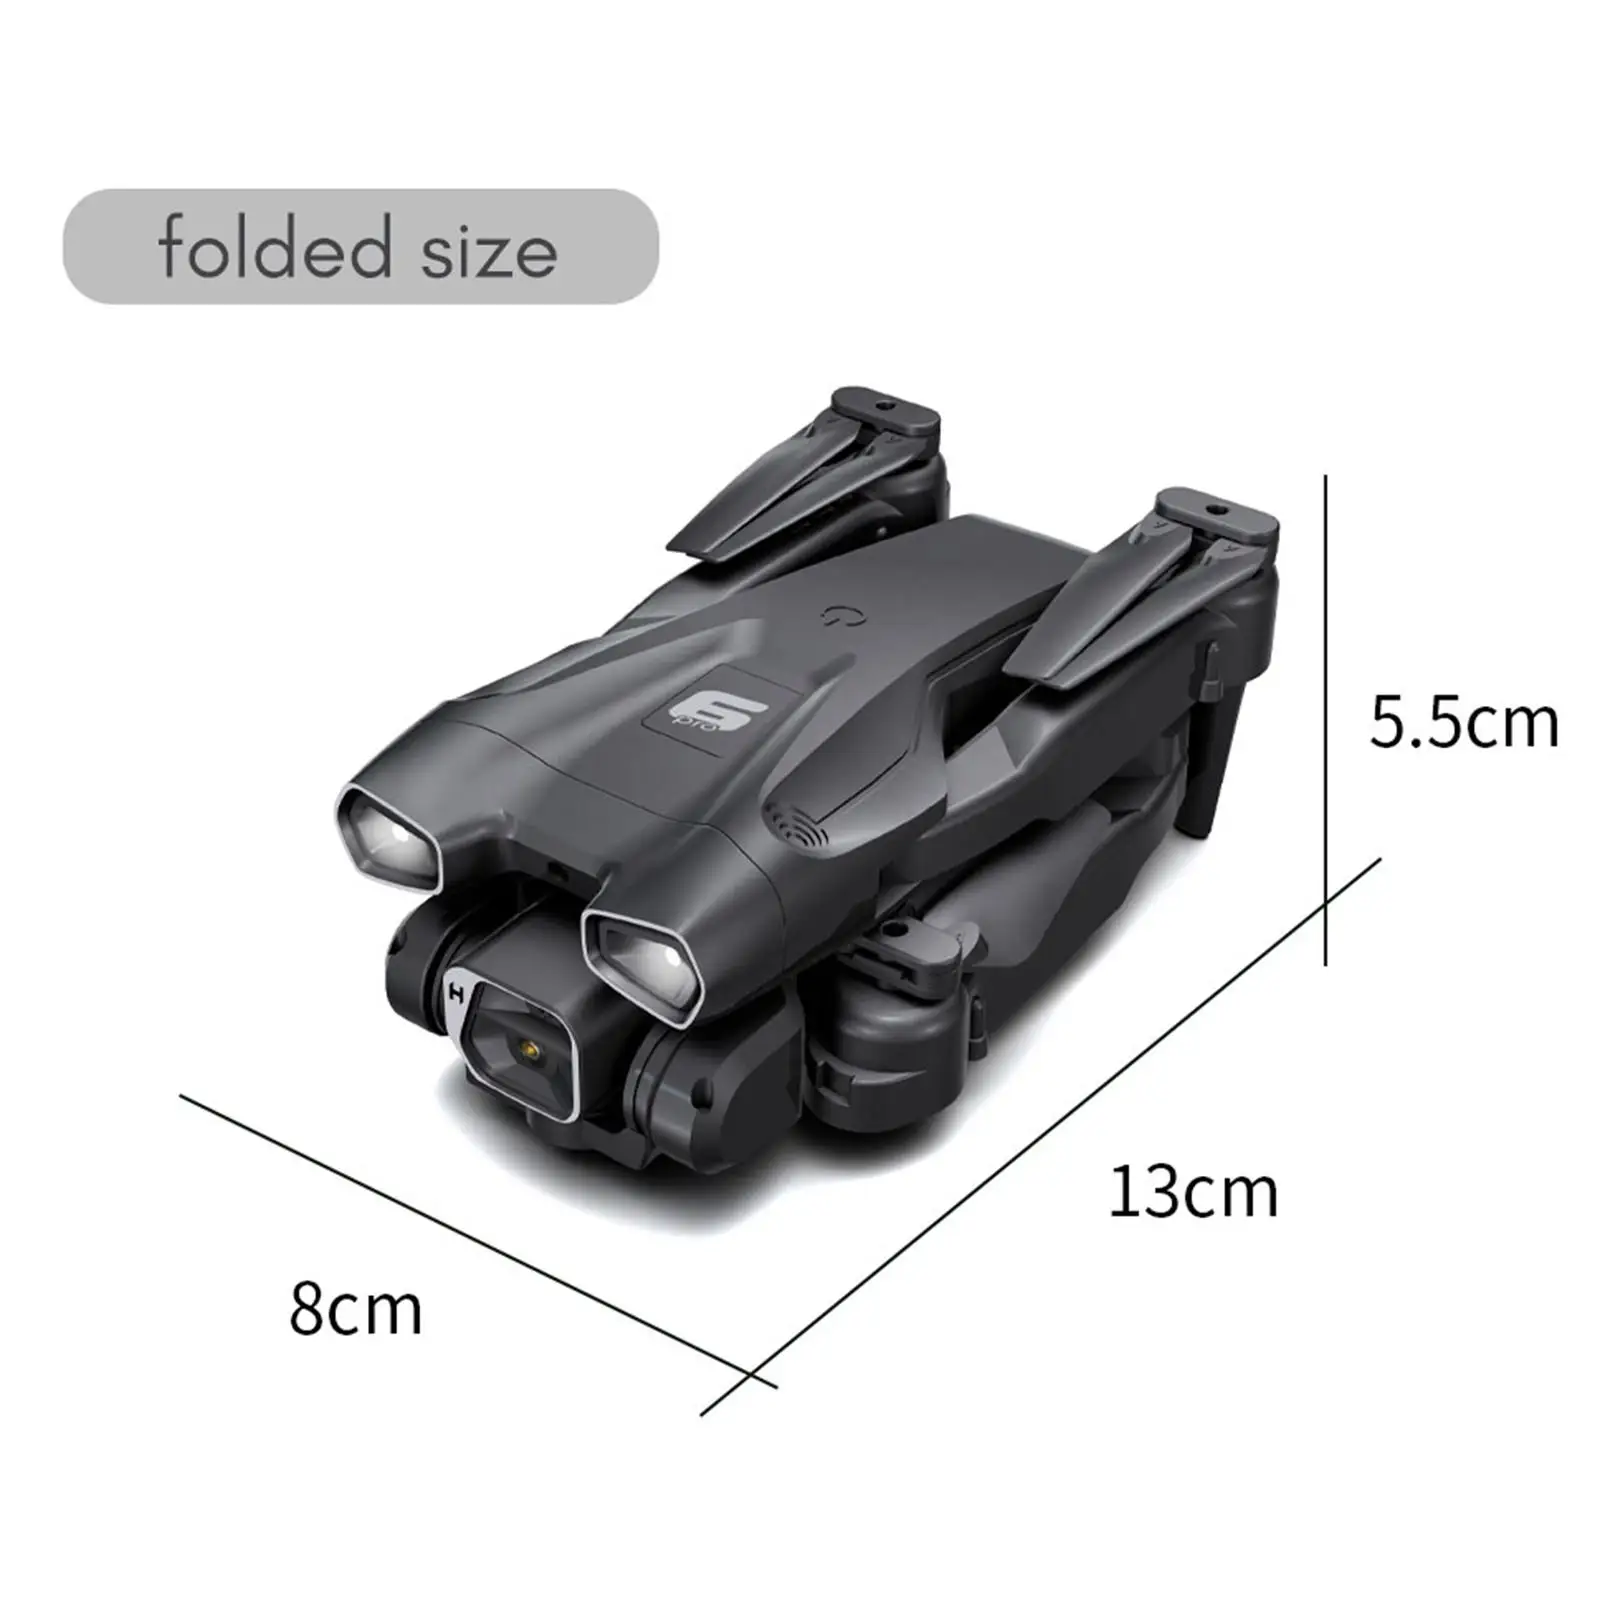 Pocket Folding Drone Quad Emergency Stop for Kids Adults App Control 3 speeds Switching Foldable RC Quadcopter Toys Gifts